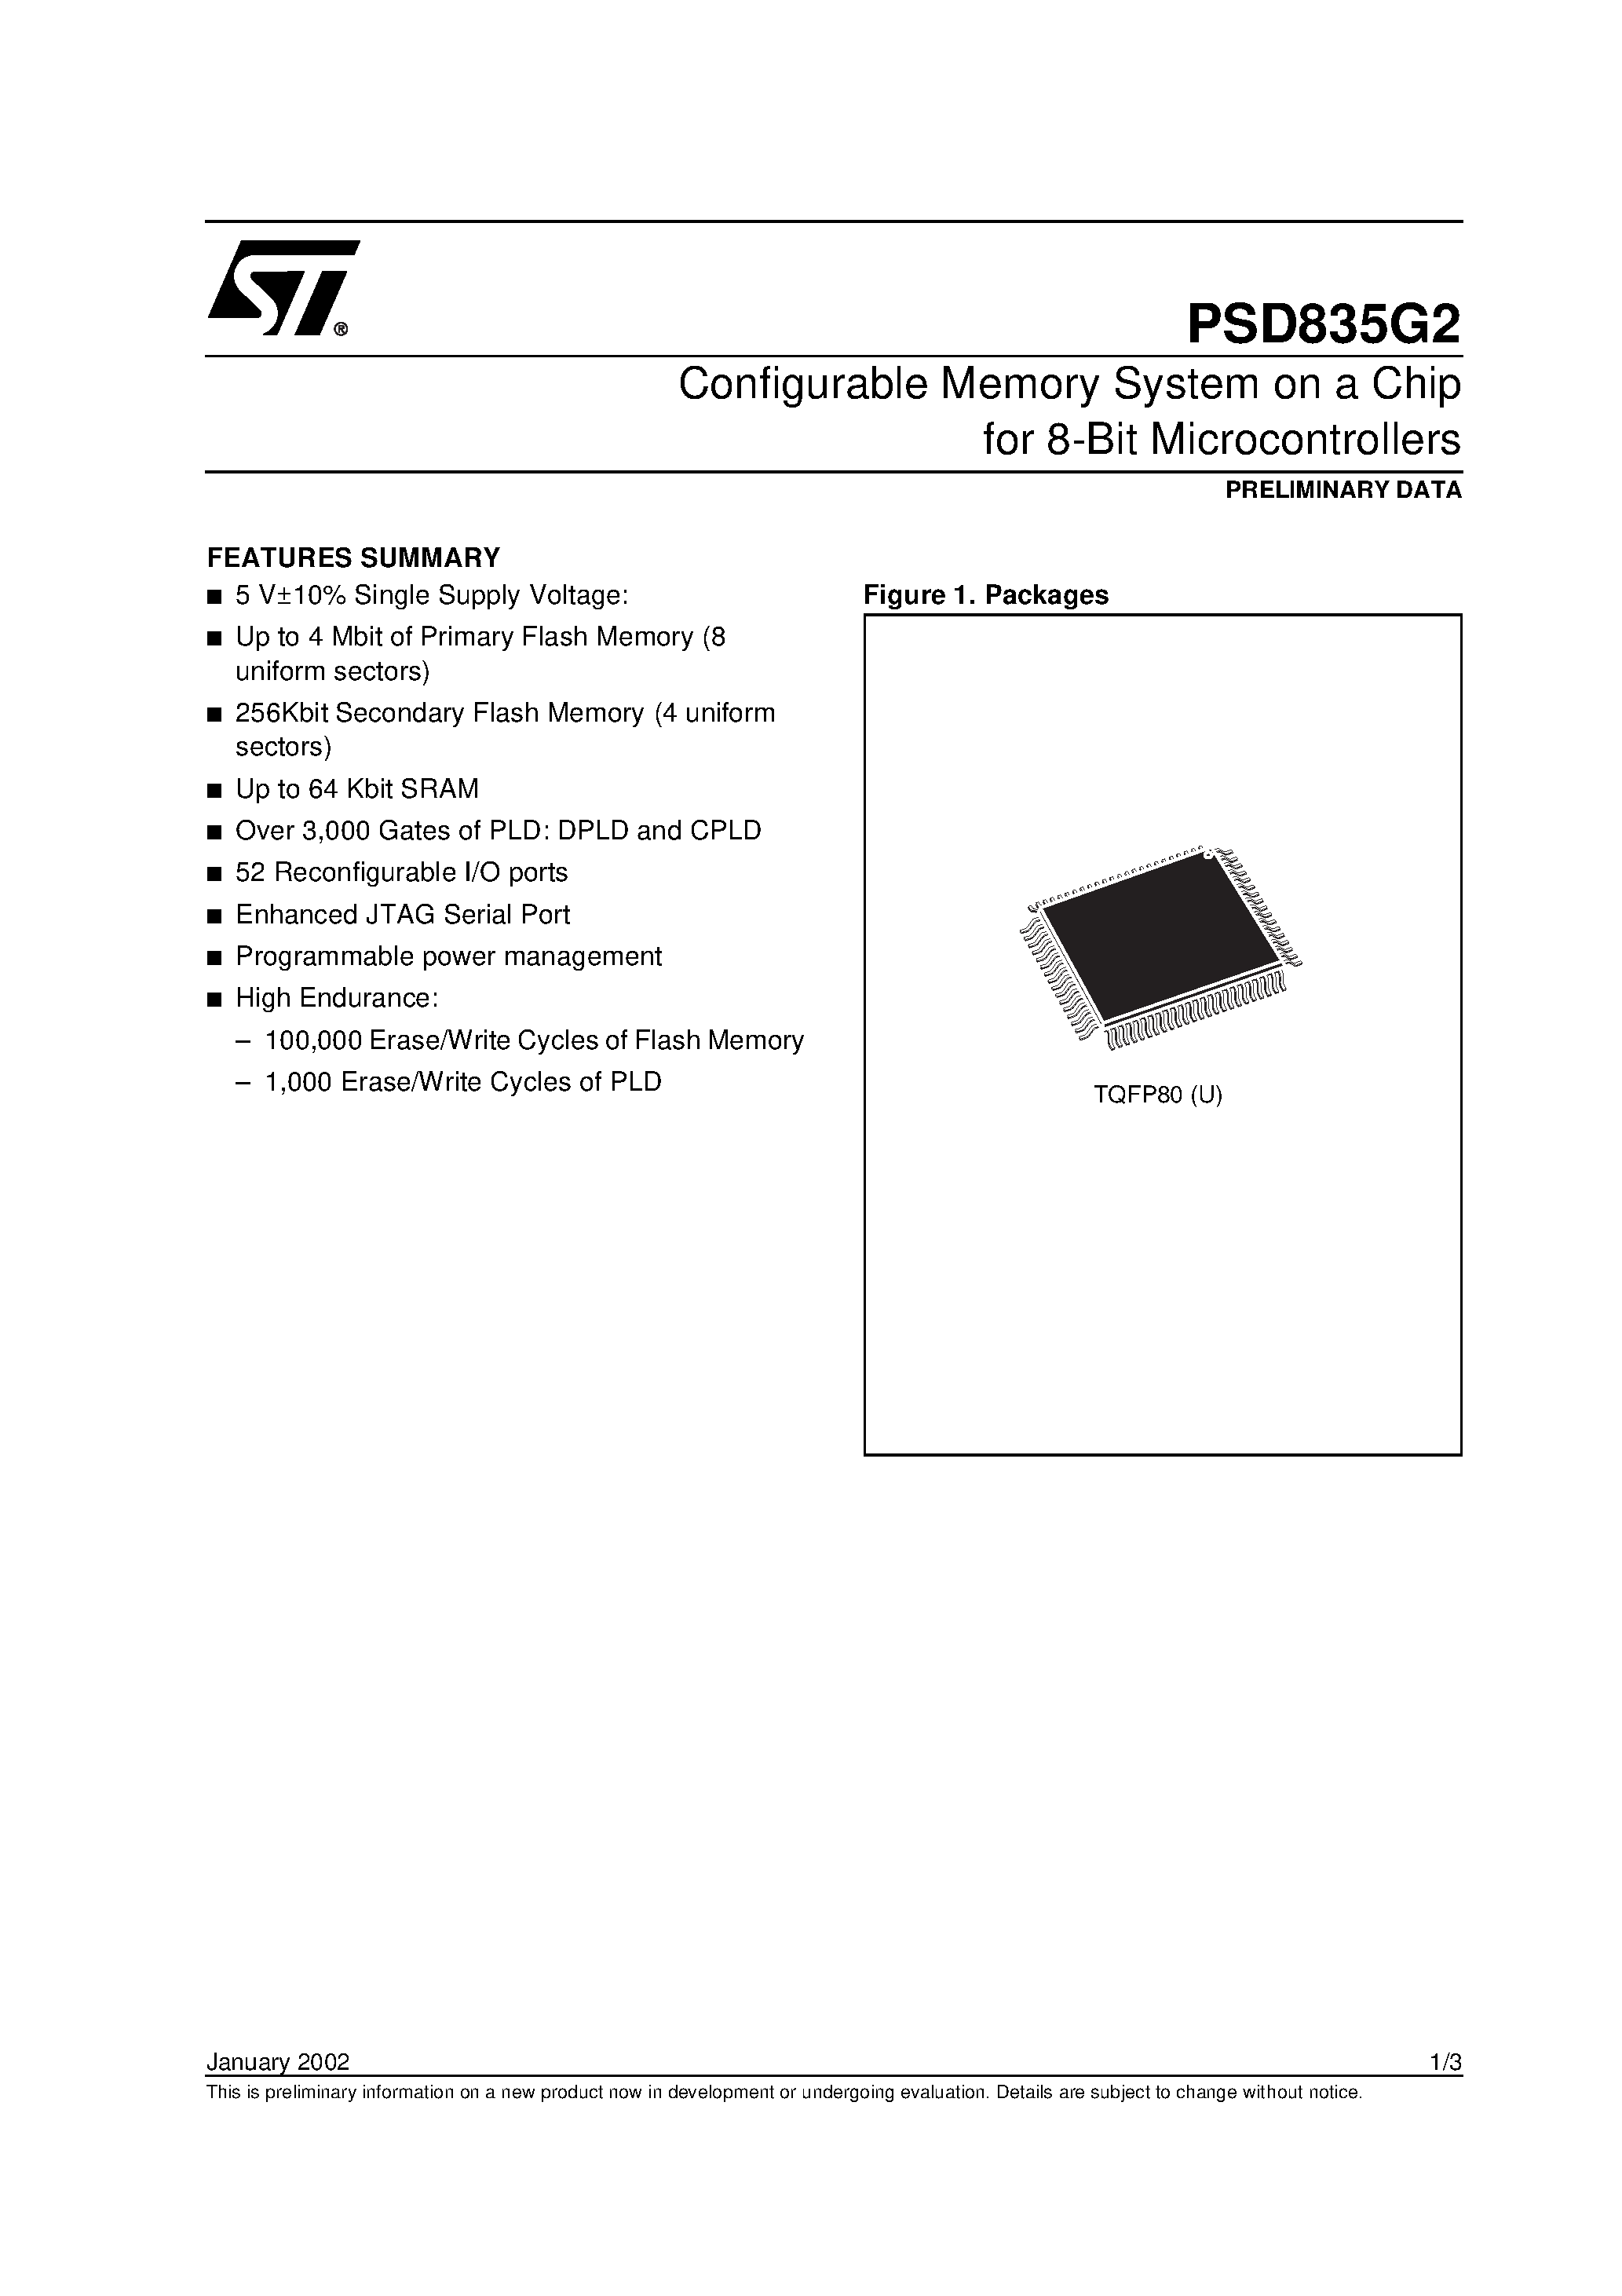 Datasheet PSD835F2-A-70M - Configurable Memory System on a Chip for 8-Bit Microcontrollers page 1